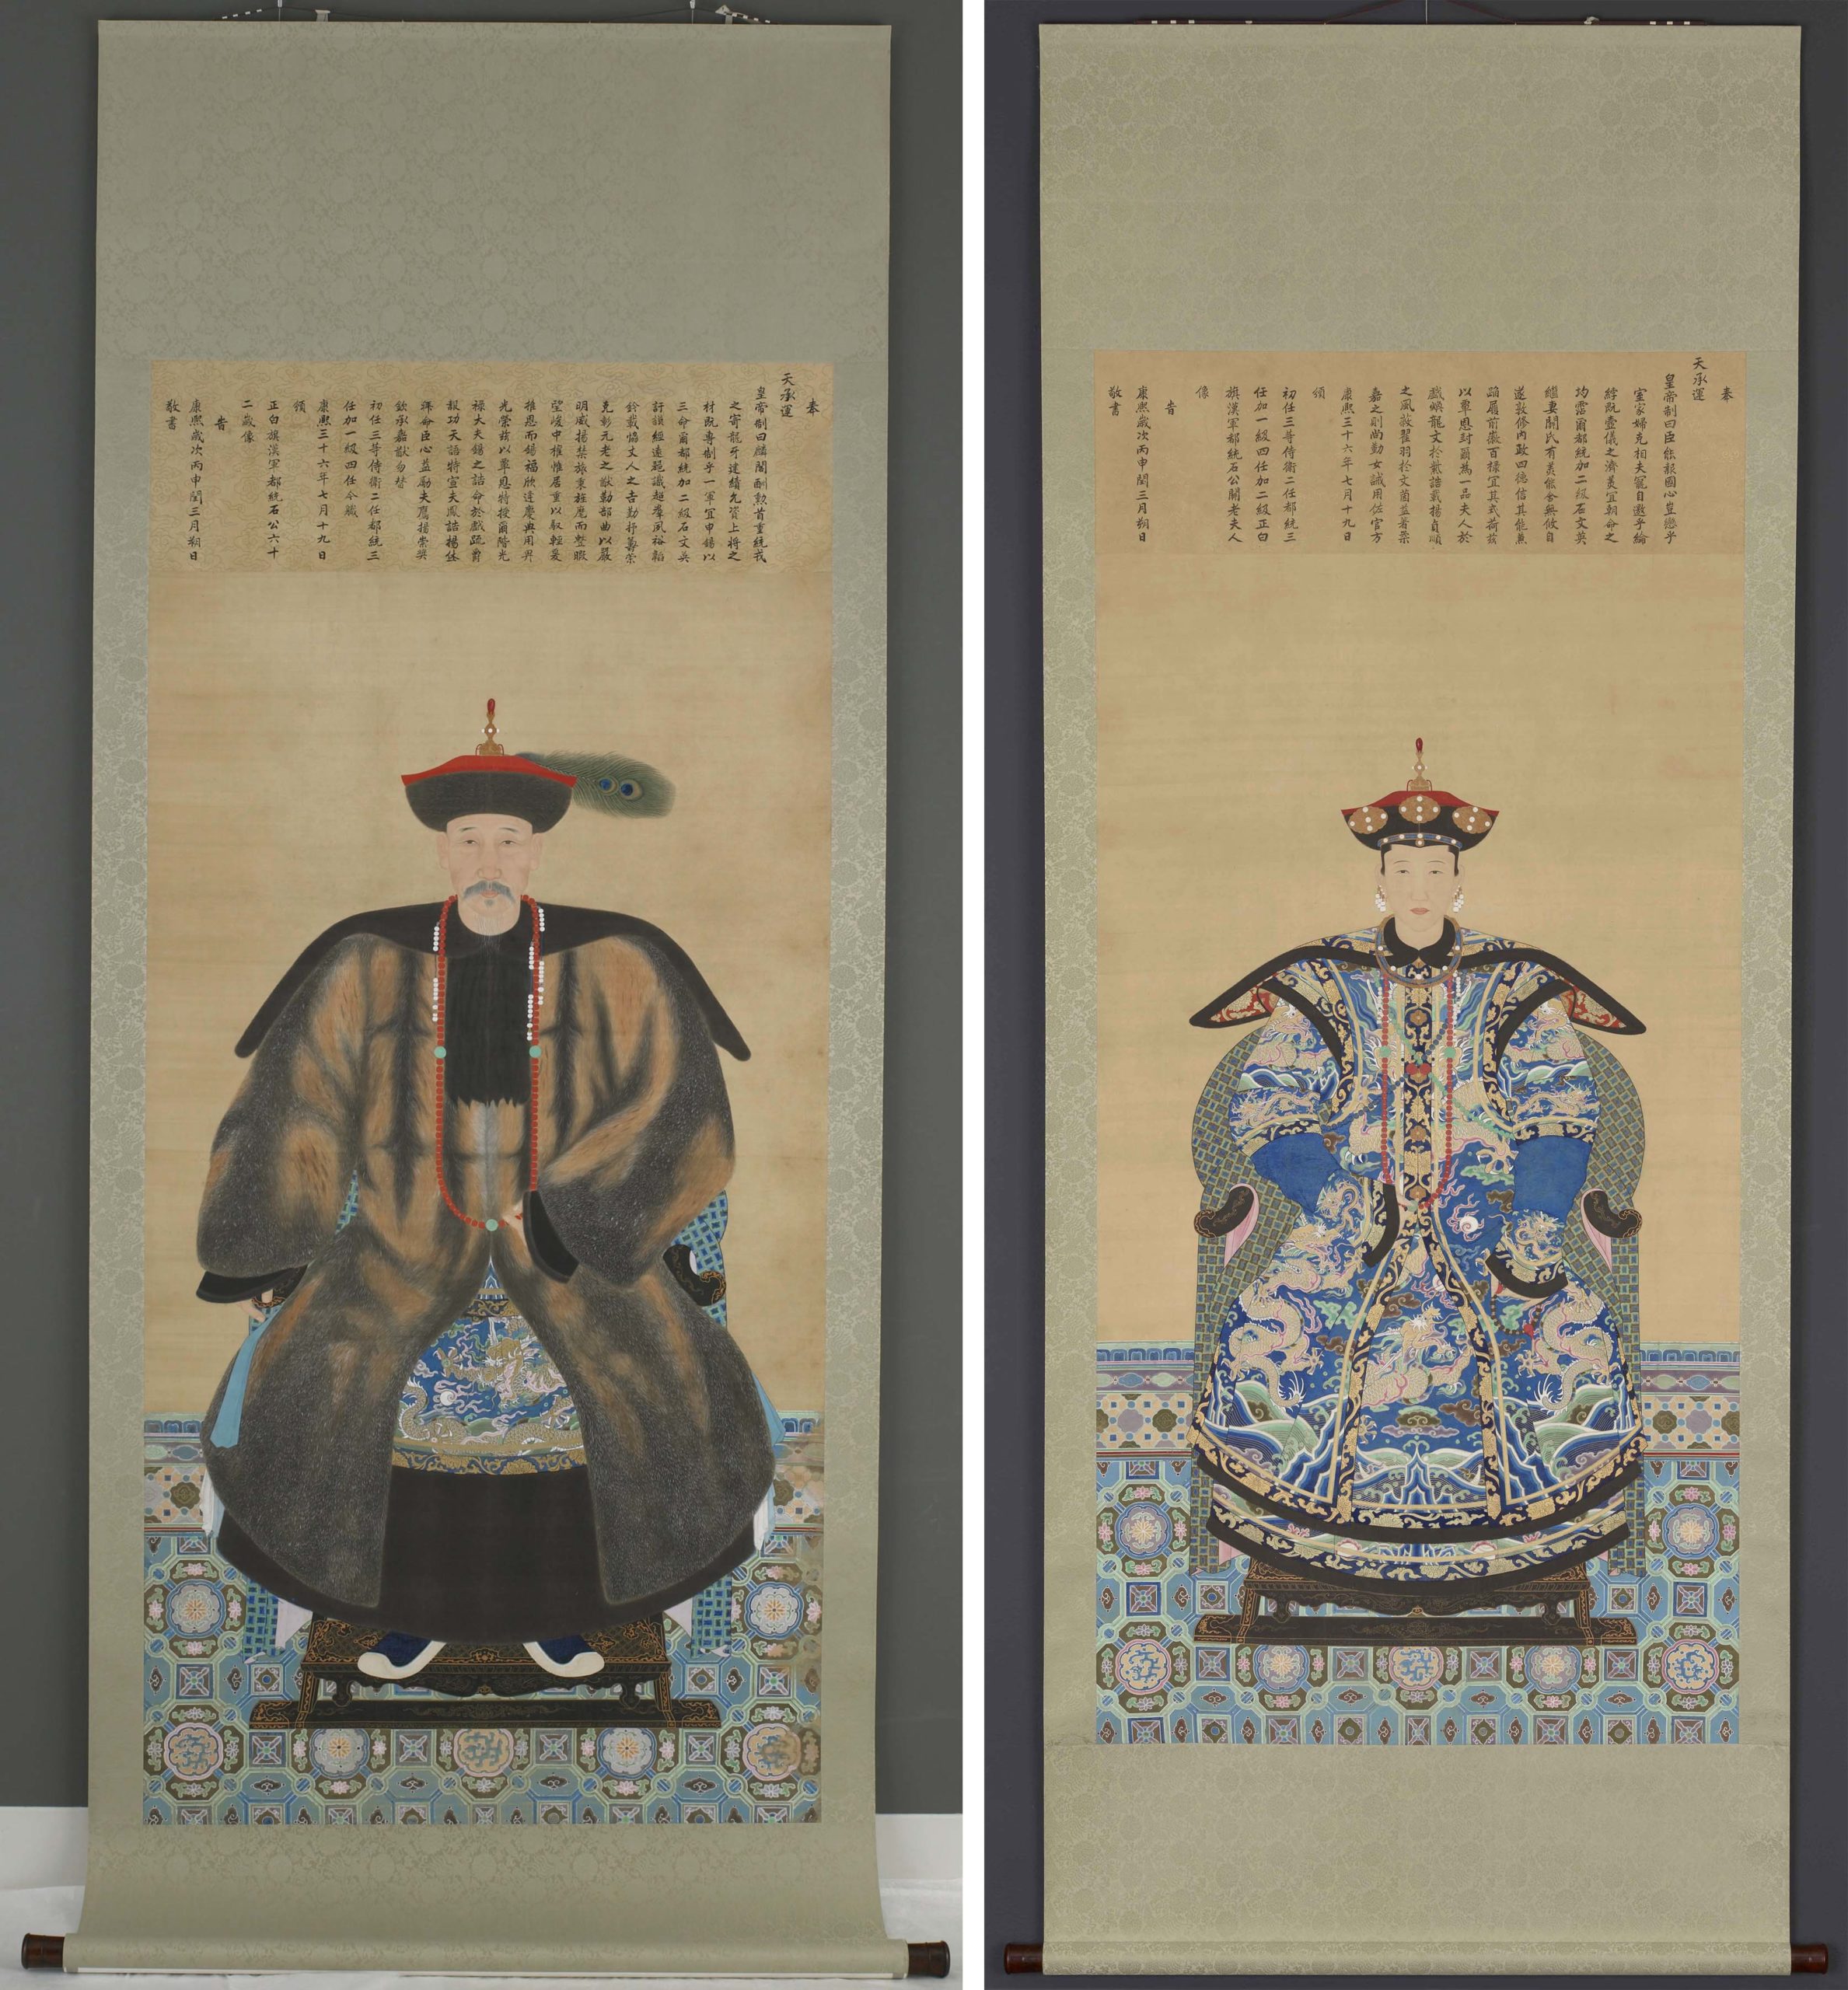 Portraits of Shi Wenying and Lady Guan